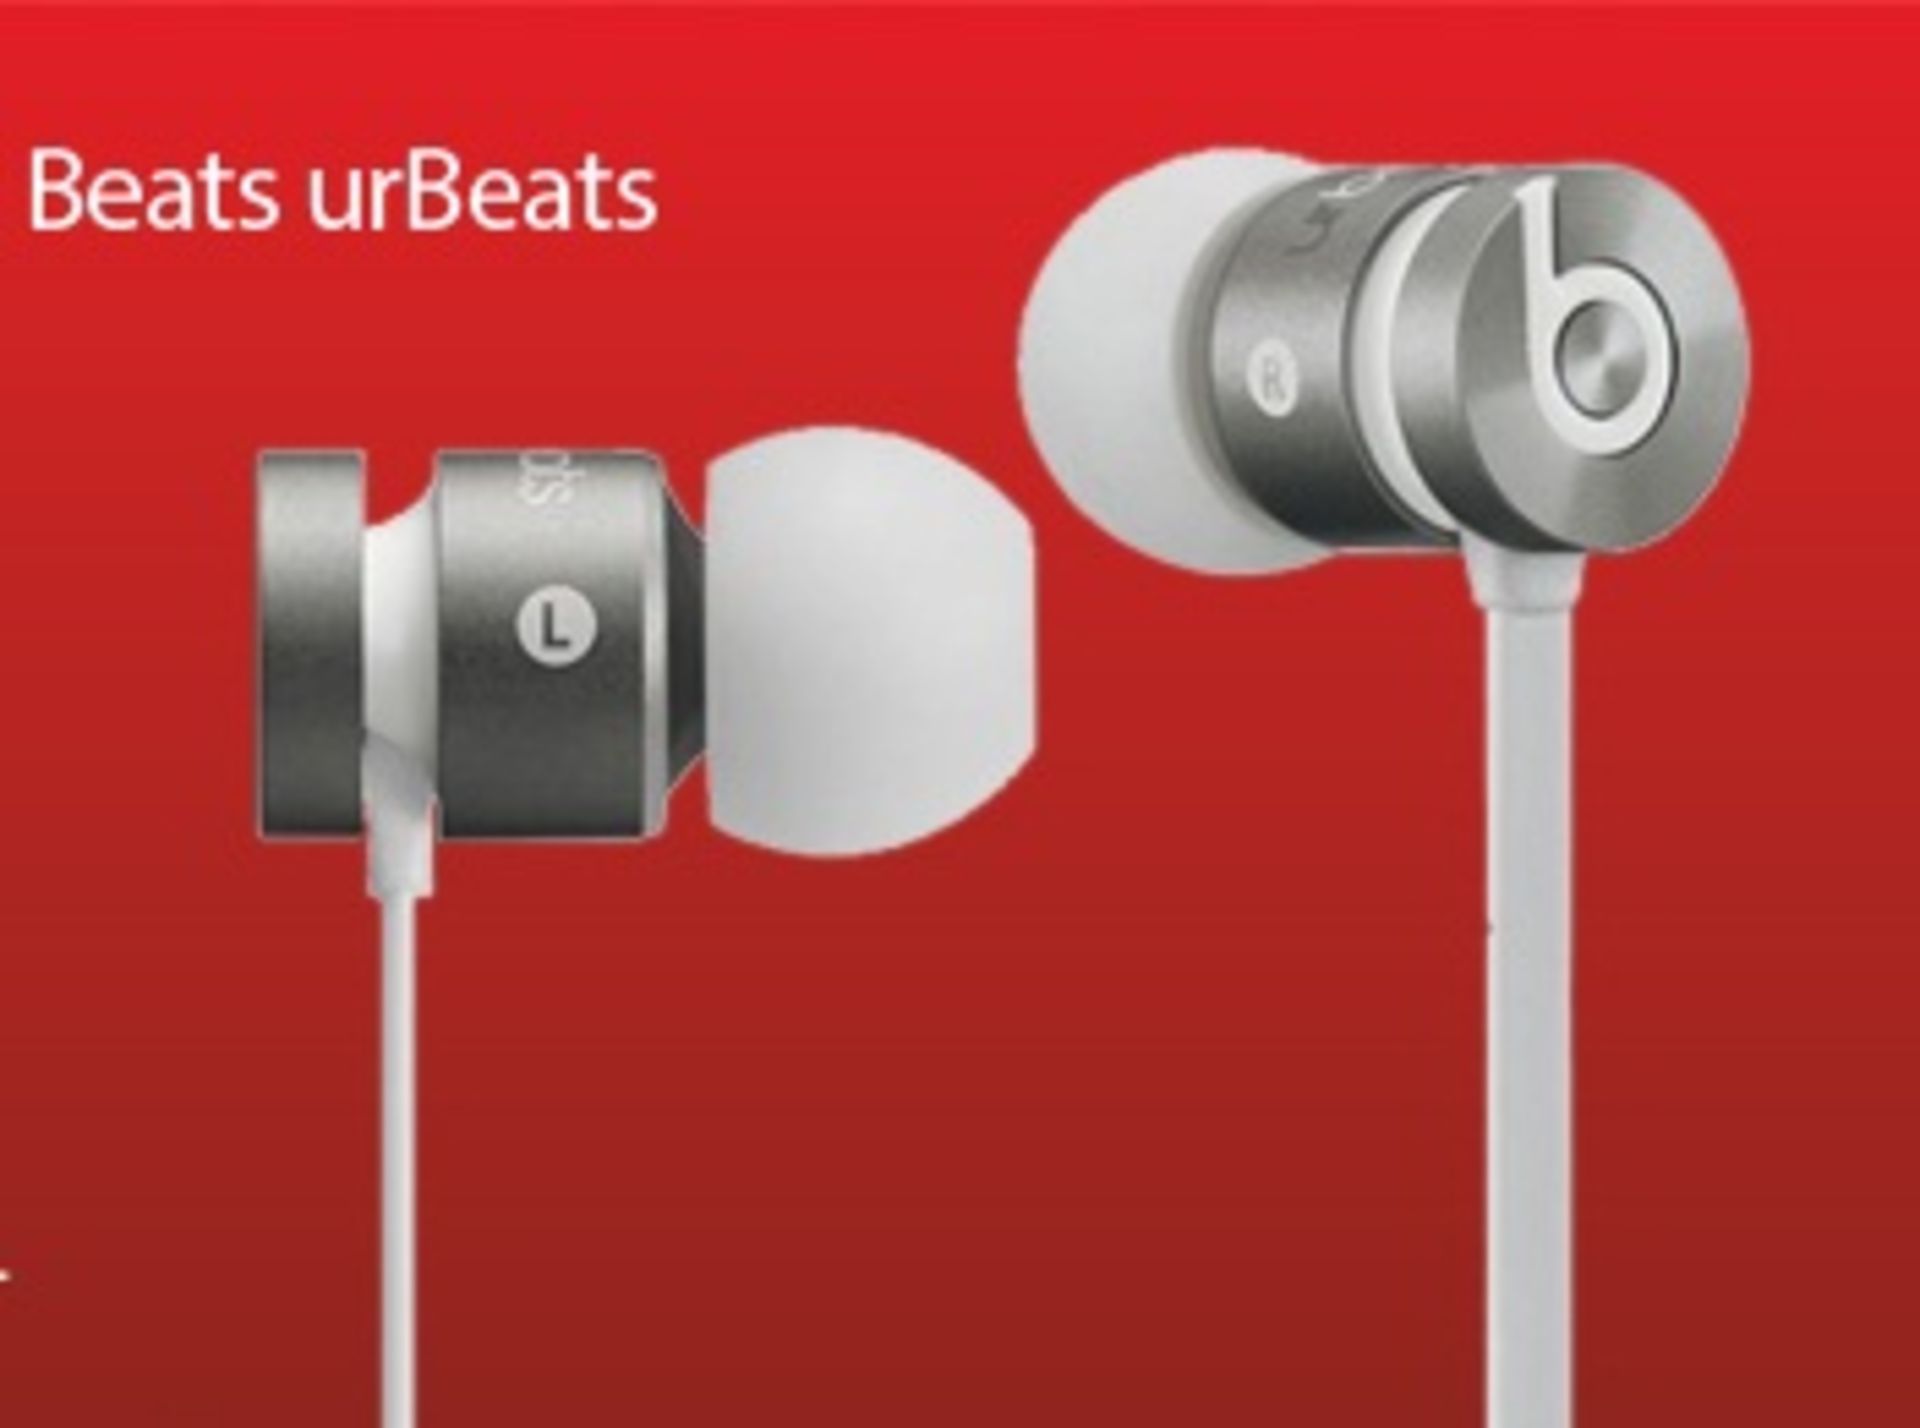 V Brand New Beats By Dr Dre urBeats Earphones - Silver - These are boxed and sealed - With Apple - Image 2 of 3